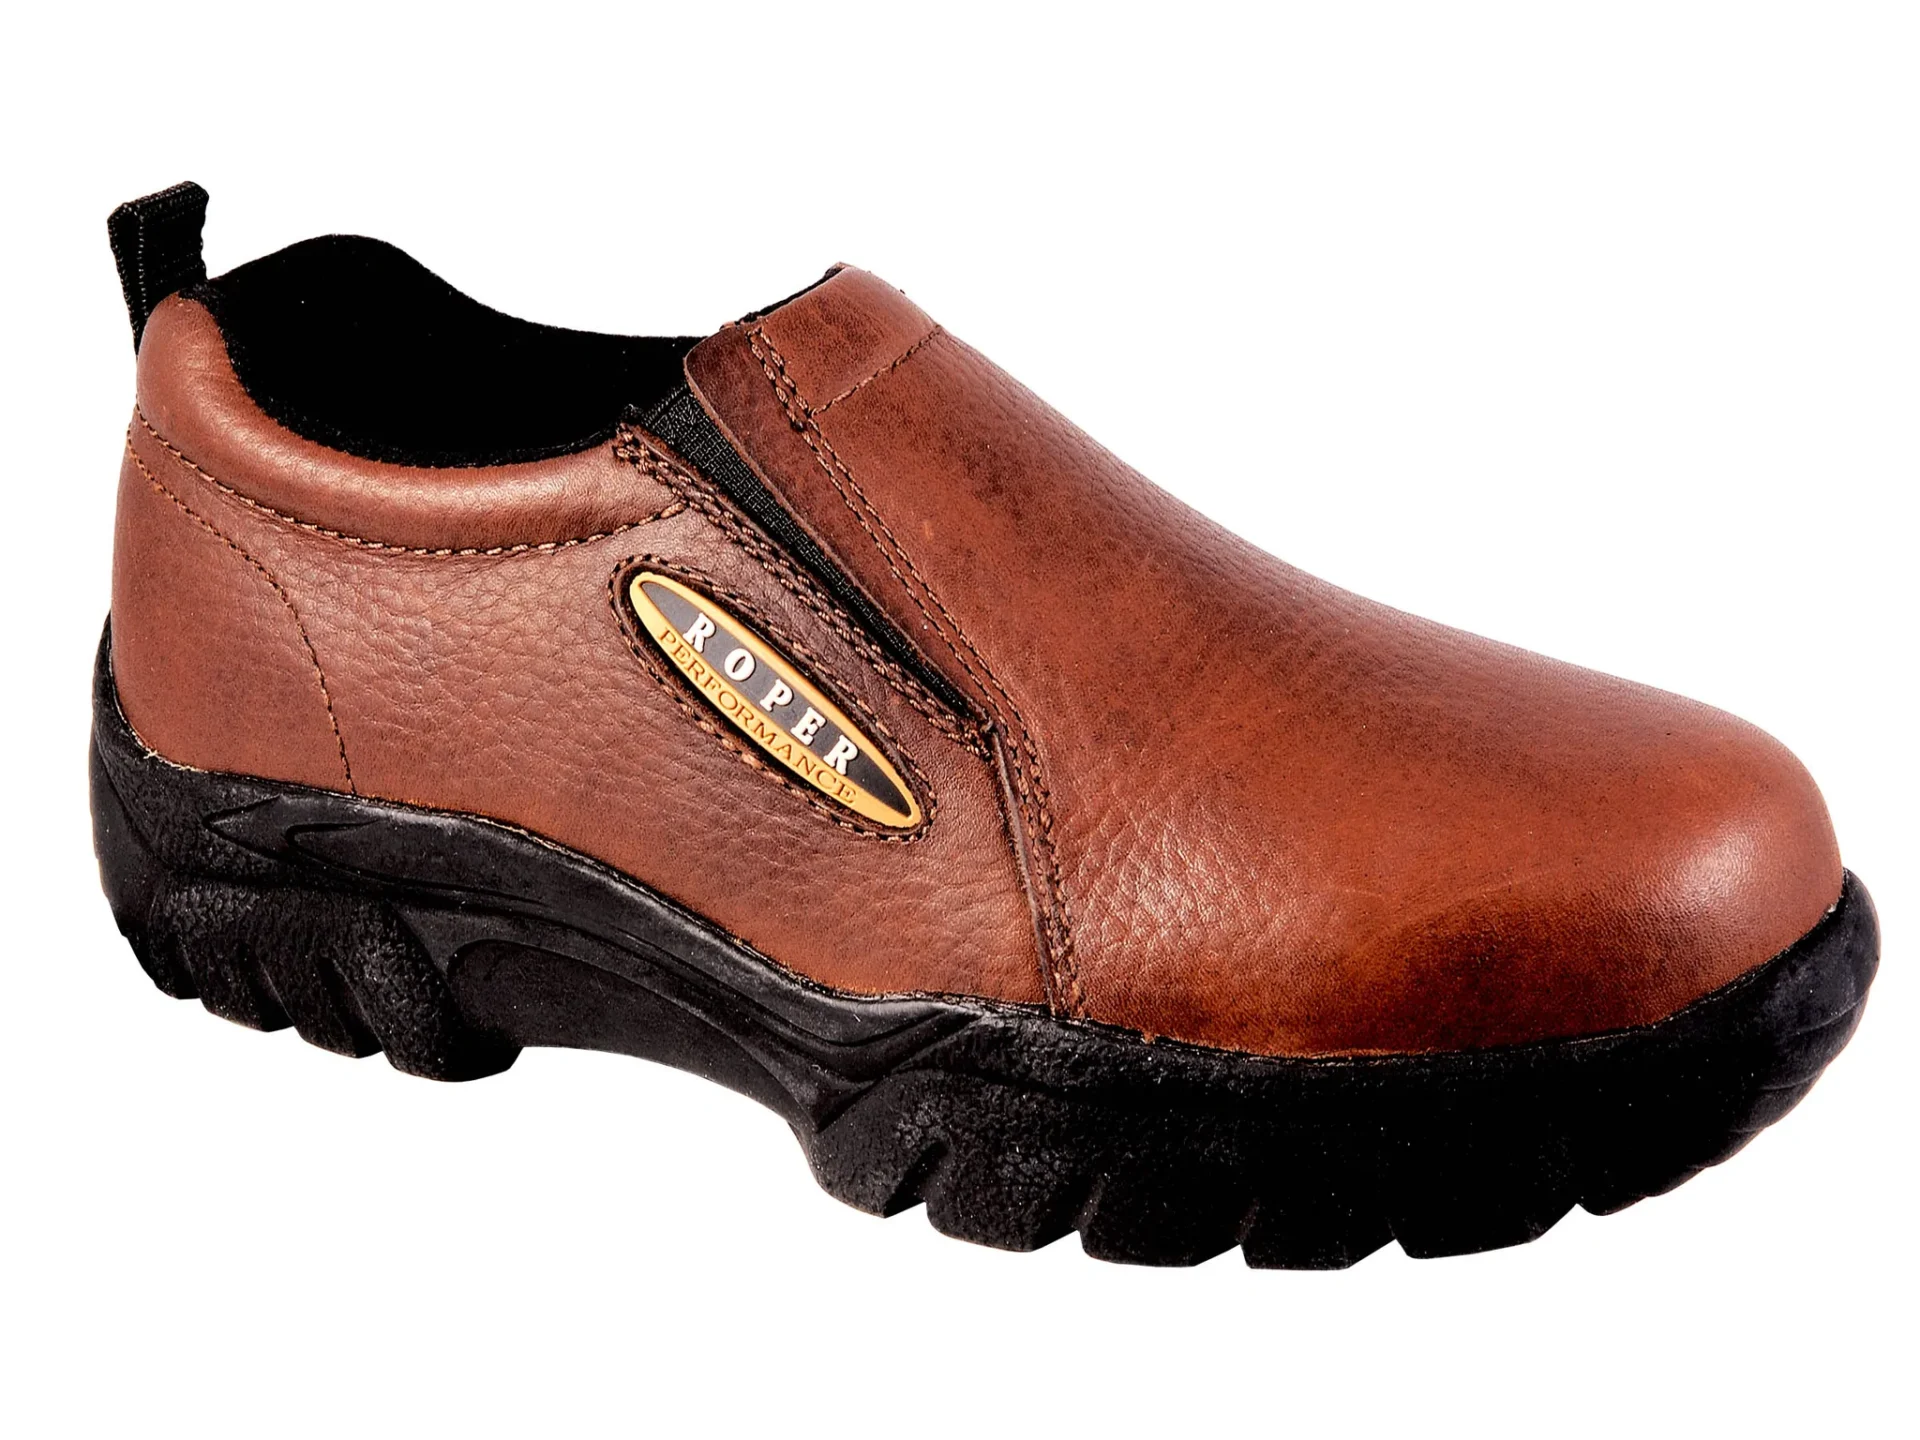 A Brown Color Leather Slip on Shoe With Black Sole